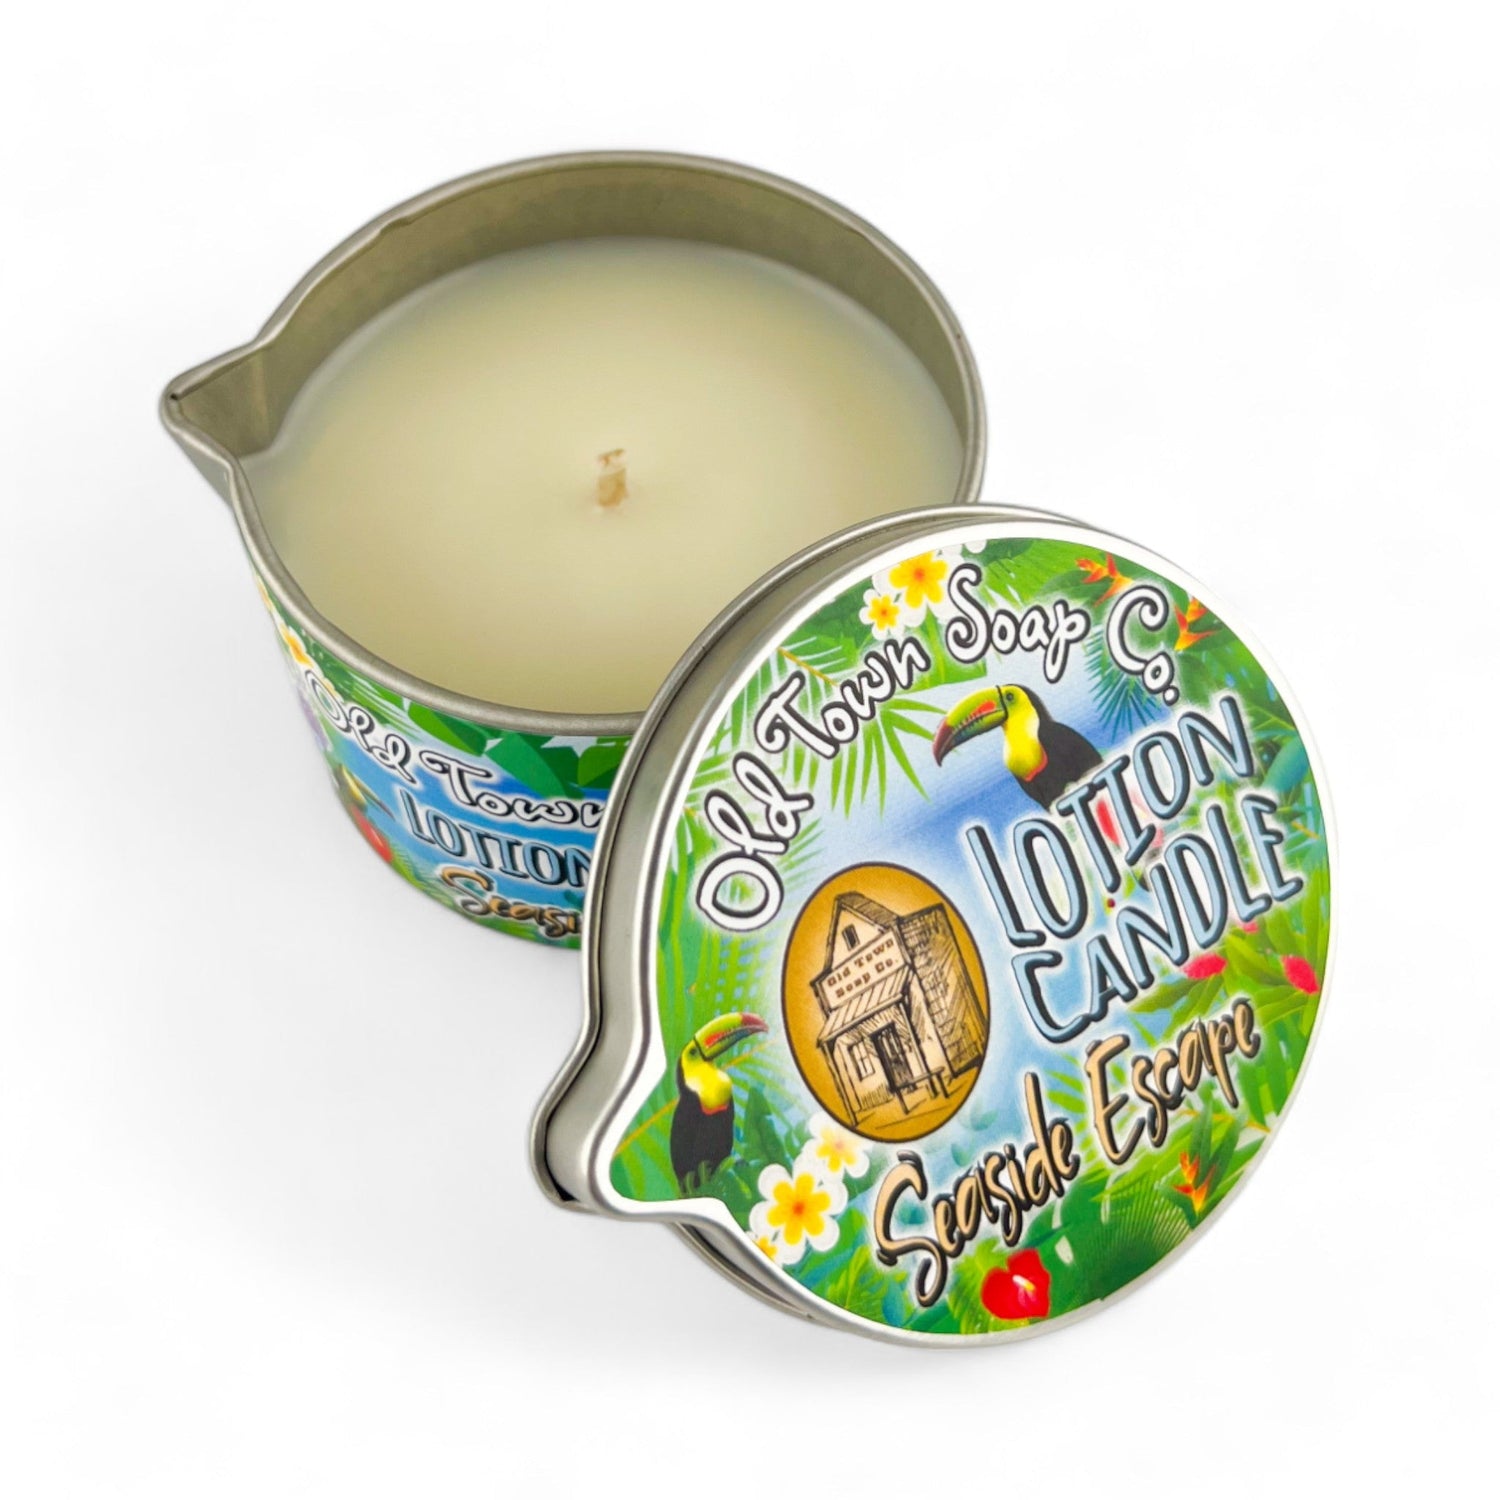 Seaside Escape -Lotion Candles - Old Town Soap Co.